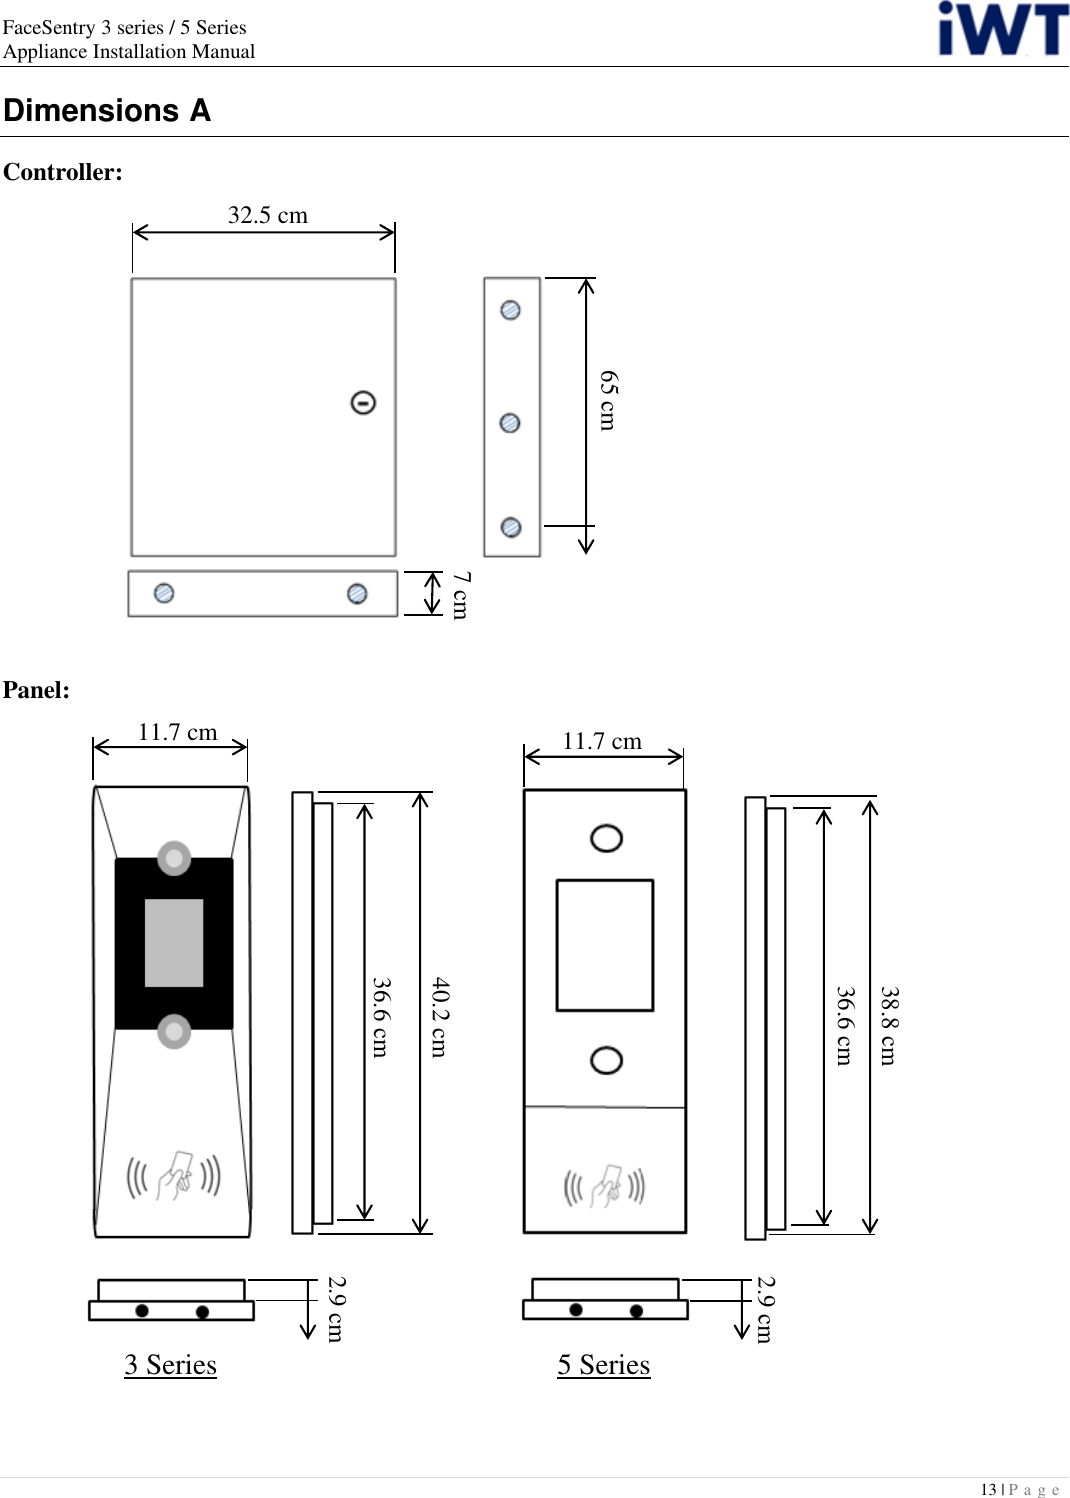 FaceSentry 3 series / 5 Series Appliance Installation Manual 13 | P a g e   Dimensions A Controller:                  Panel:    3 Series 5 Series 32.5 cm 65 cm 7 cm 40.2 cm 11.7 cm 2.9 cm 38.8 cm 2.9 cm 11.7 cm 36.6 cm 36.6 cm 